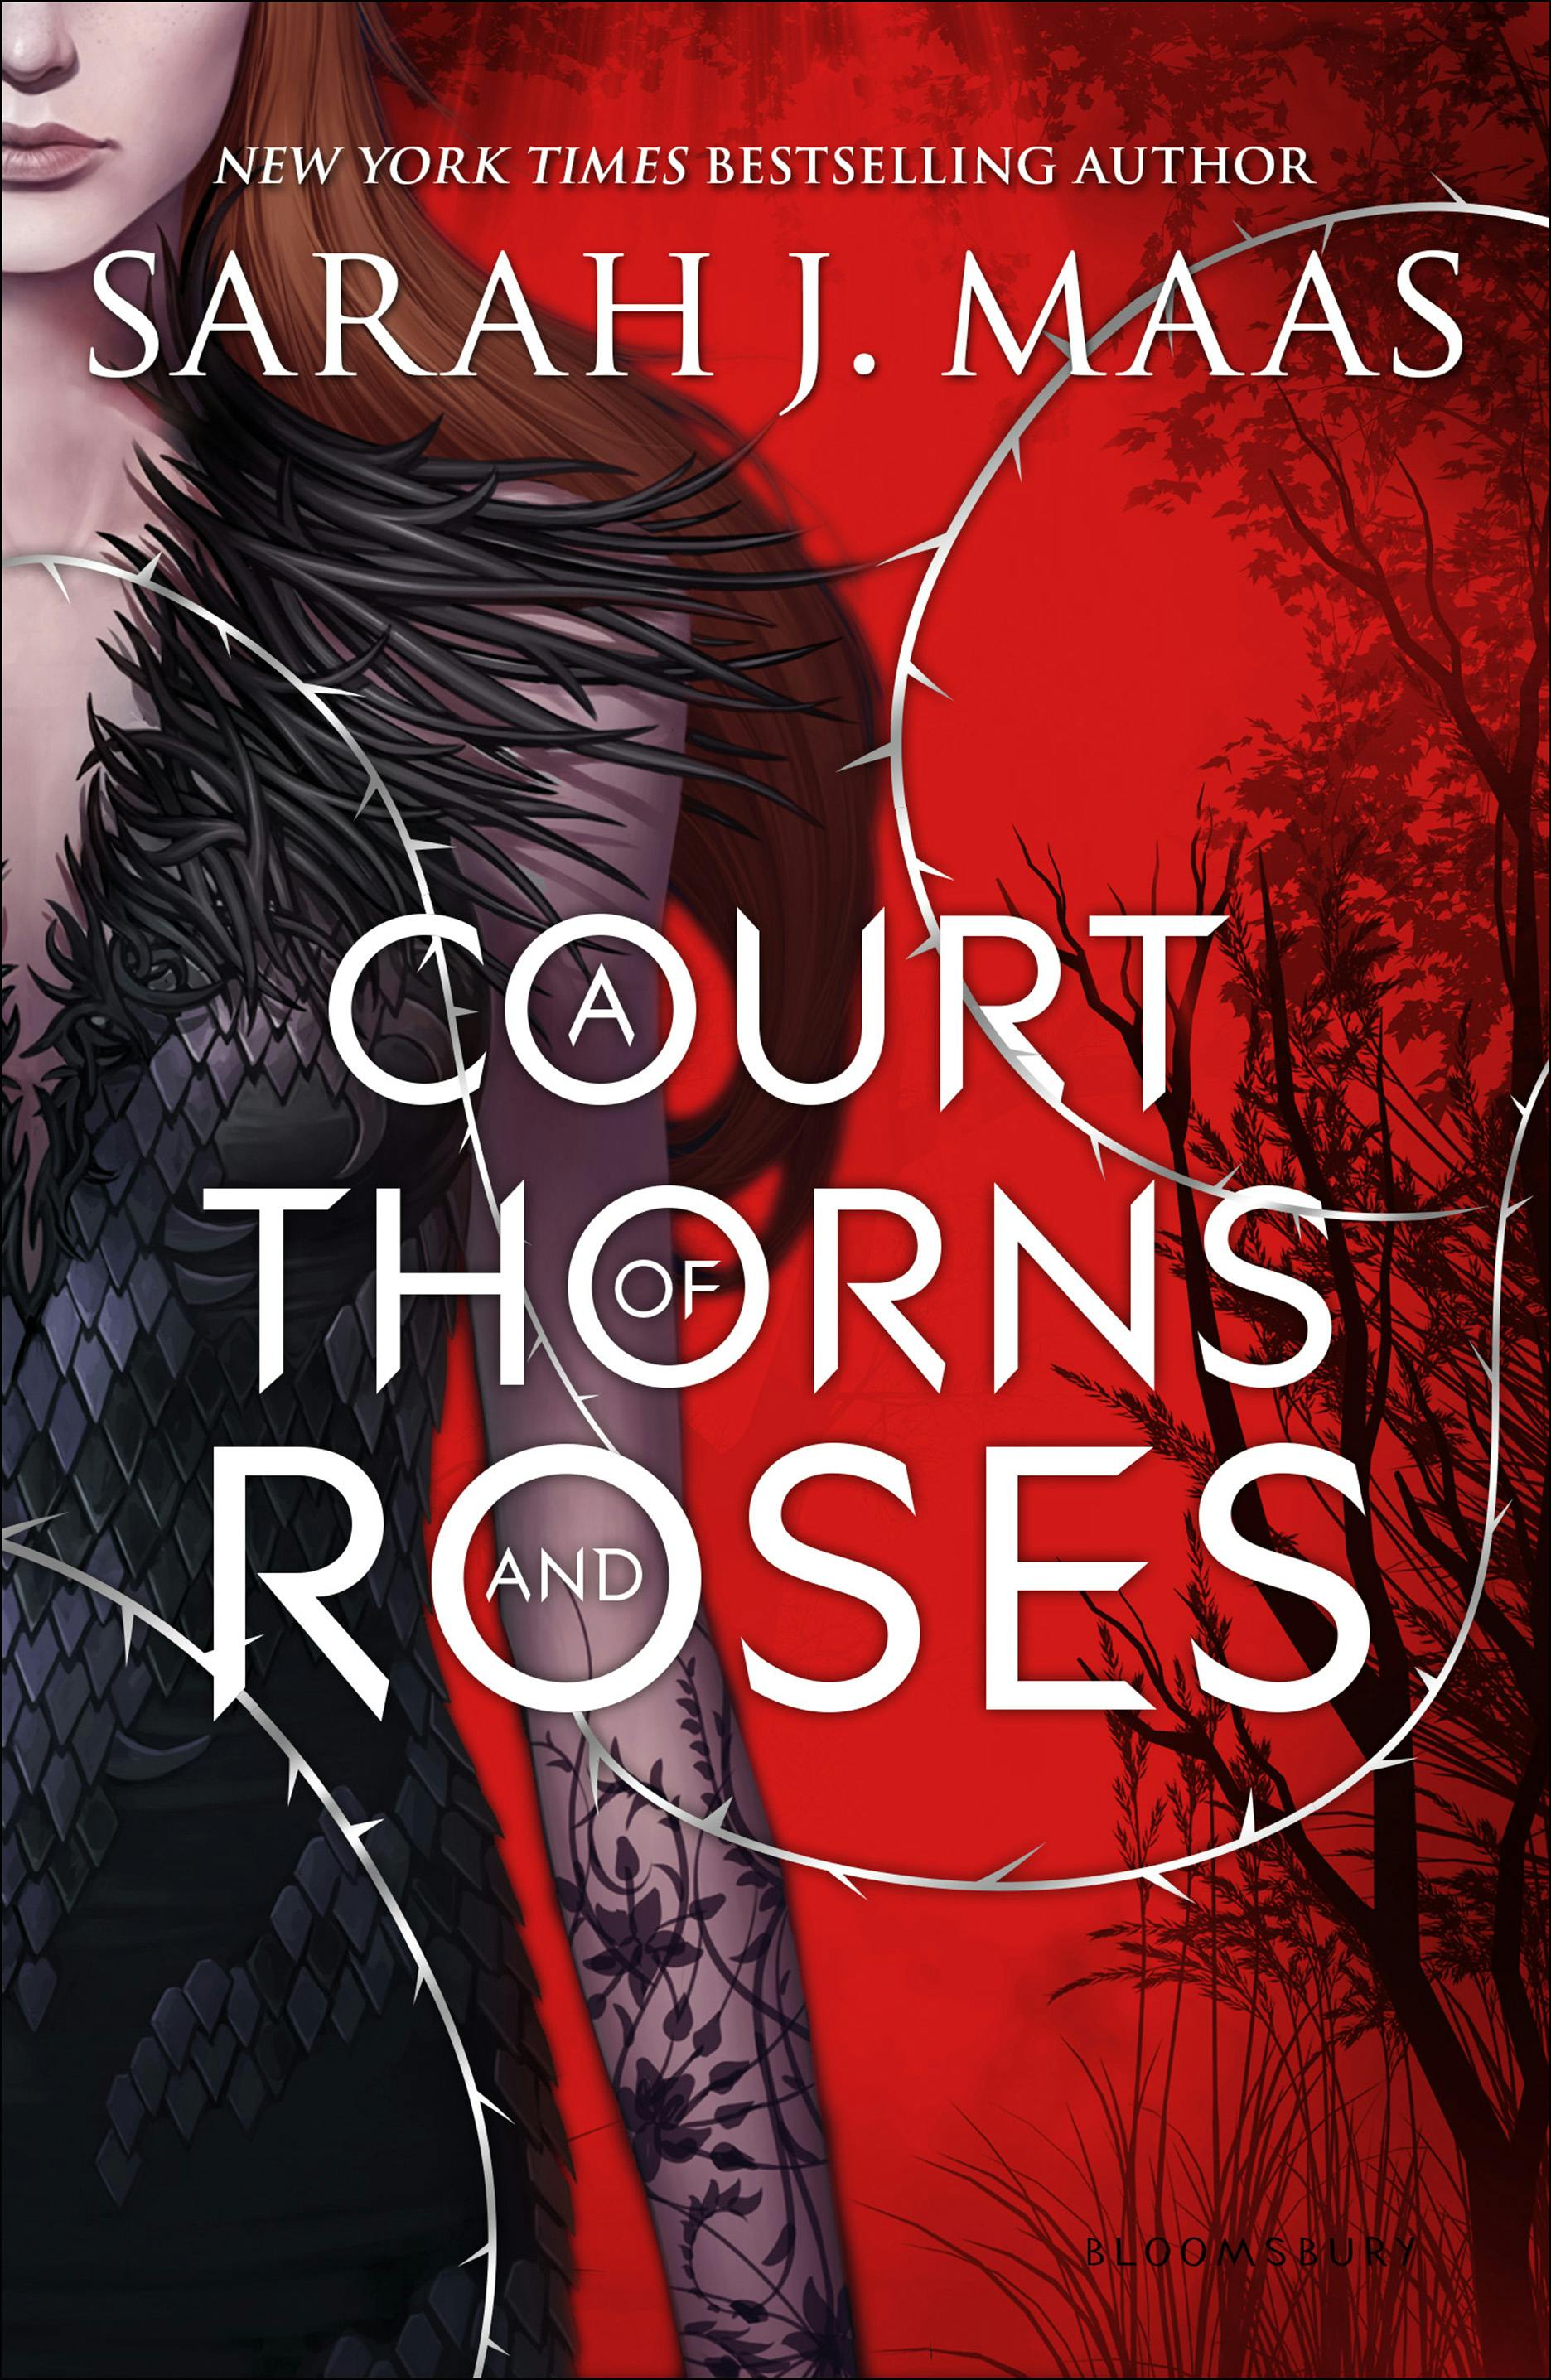 Cover of A Court of Thorns and Roses by Sarah J Maas